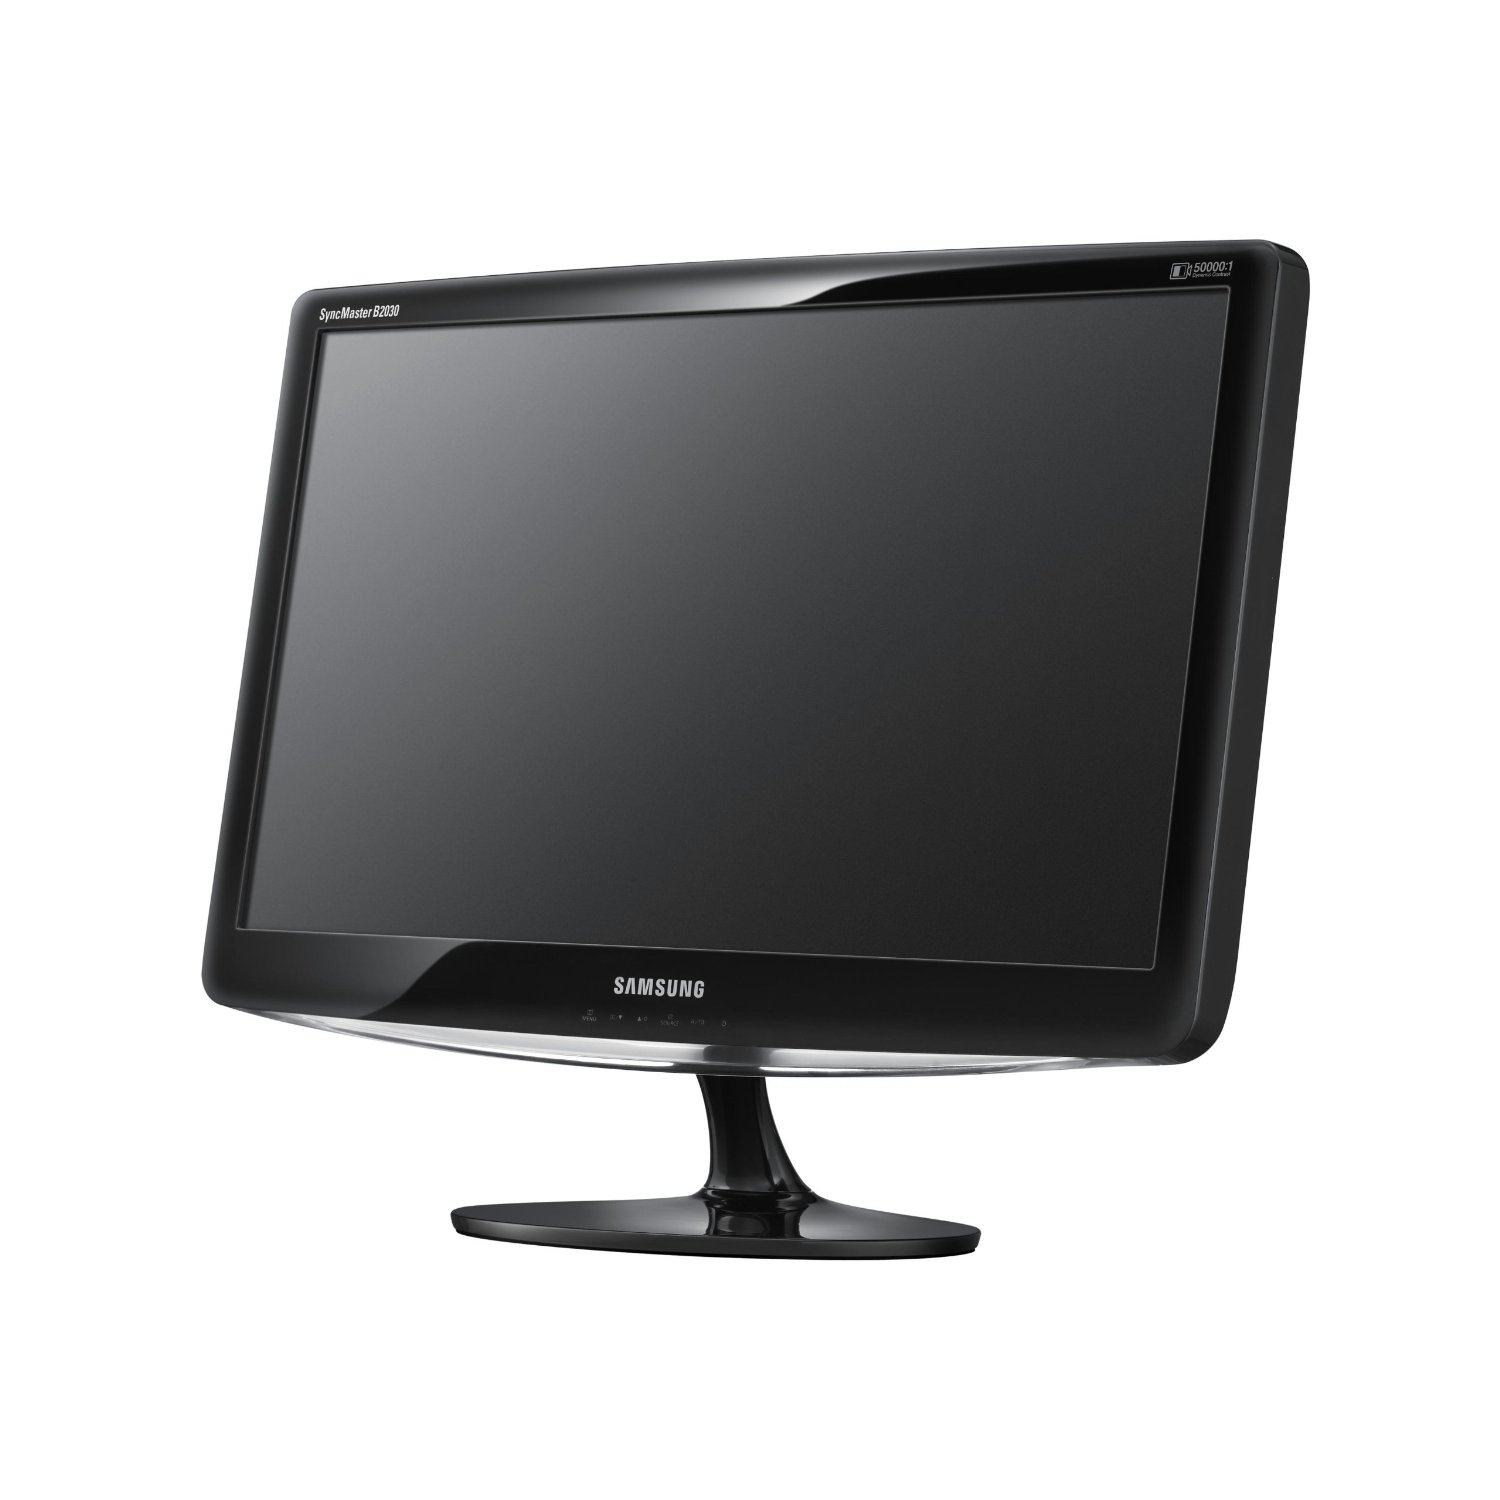 http://thetechjournal.com/wp-content/uploads/images/1112/1325144548-samsung-b2030-20inch-widescreen-lcd-monitor--3.jpg